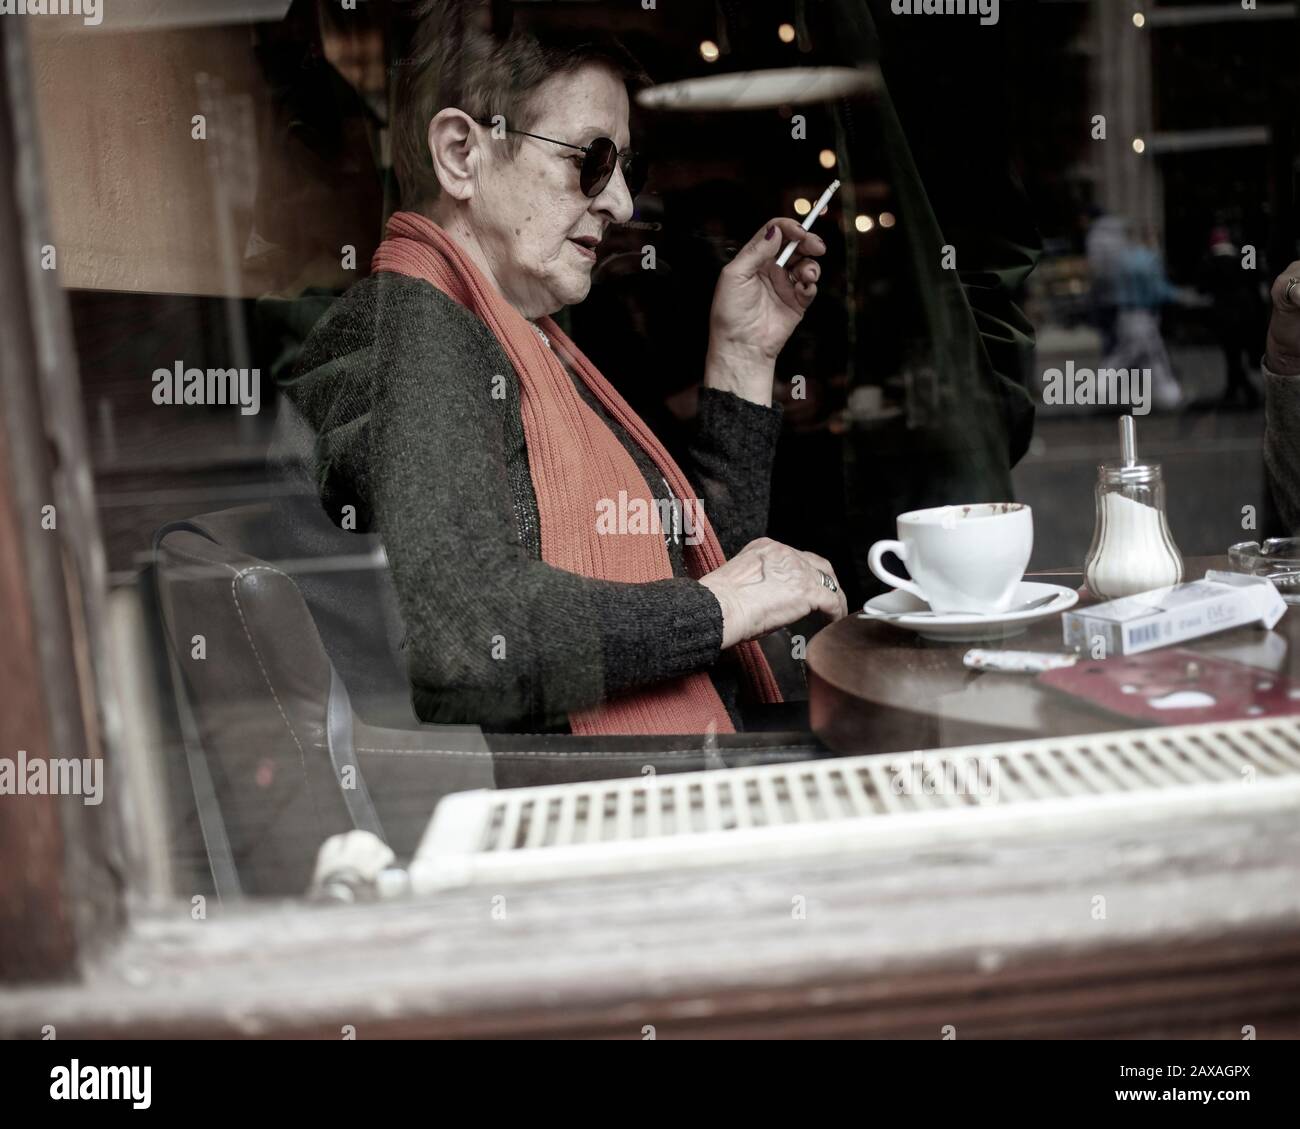 Belgrade, Serbia, Feb 7, 2020: An elderly lady enjoying coffee and cigarettes in one of downtown cafes Stock Photo